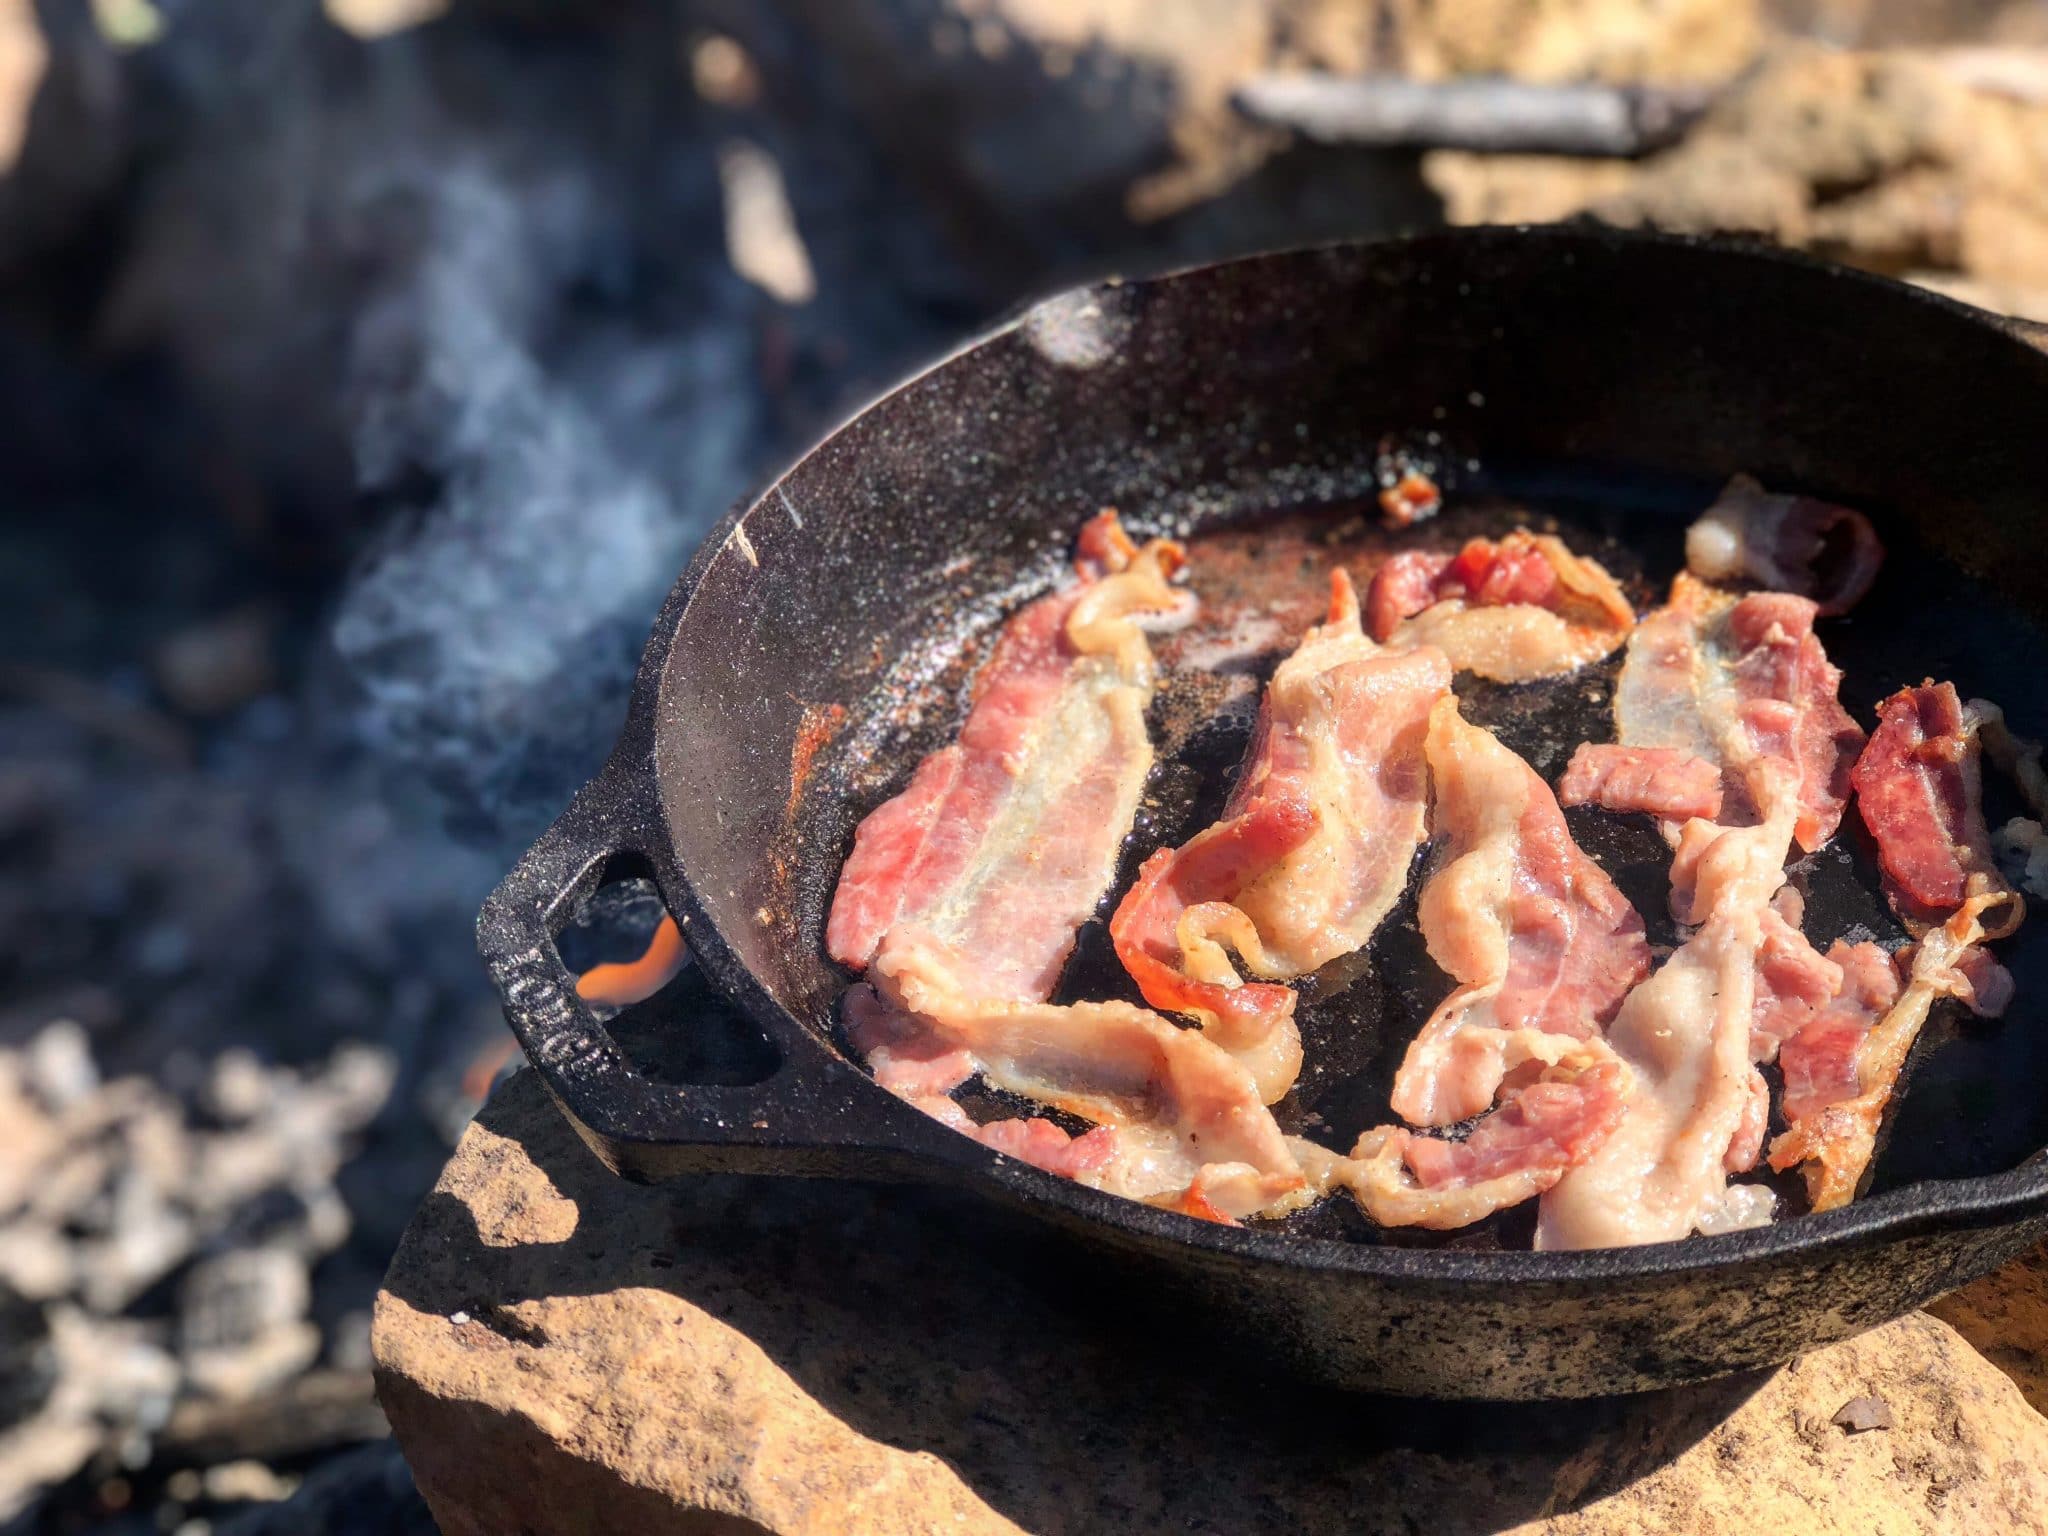 Bacon cooking on a pan over a campfire